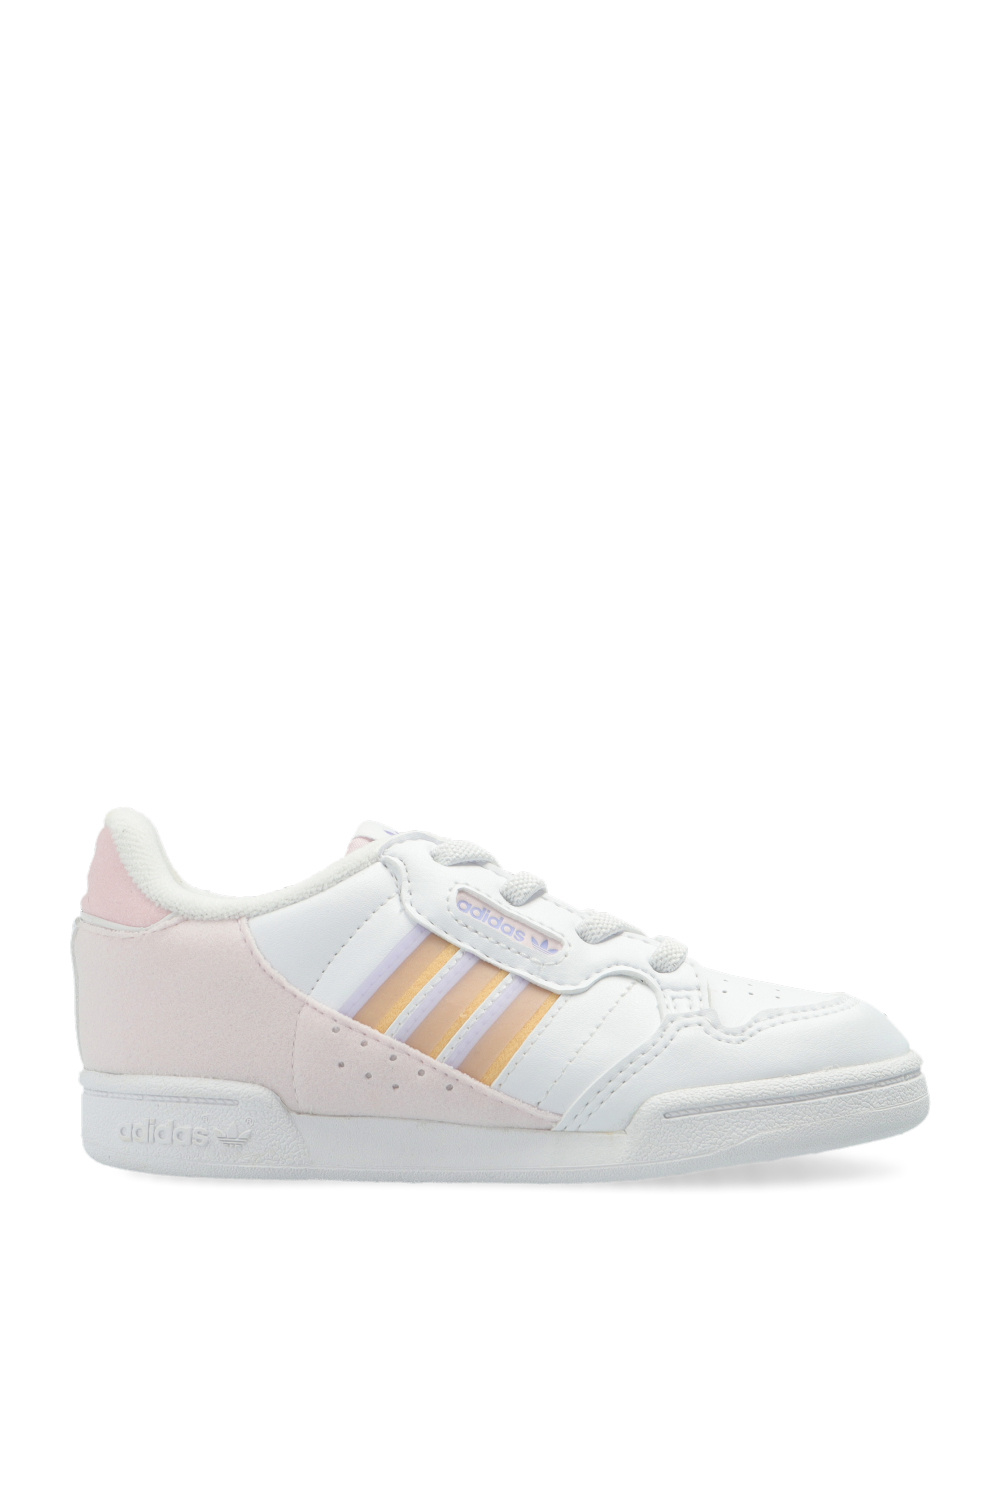 adidas suit Kids ‘Continental 80 Stripes’ sneakers